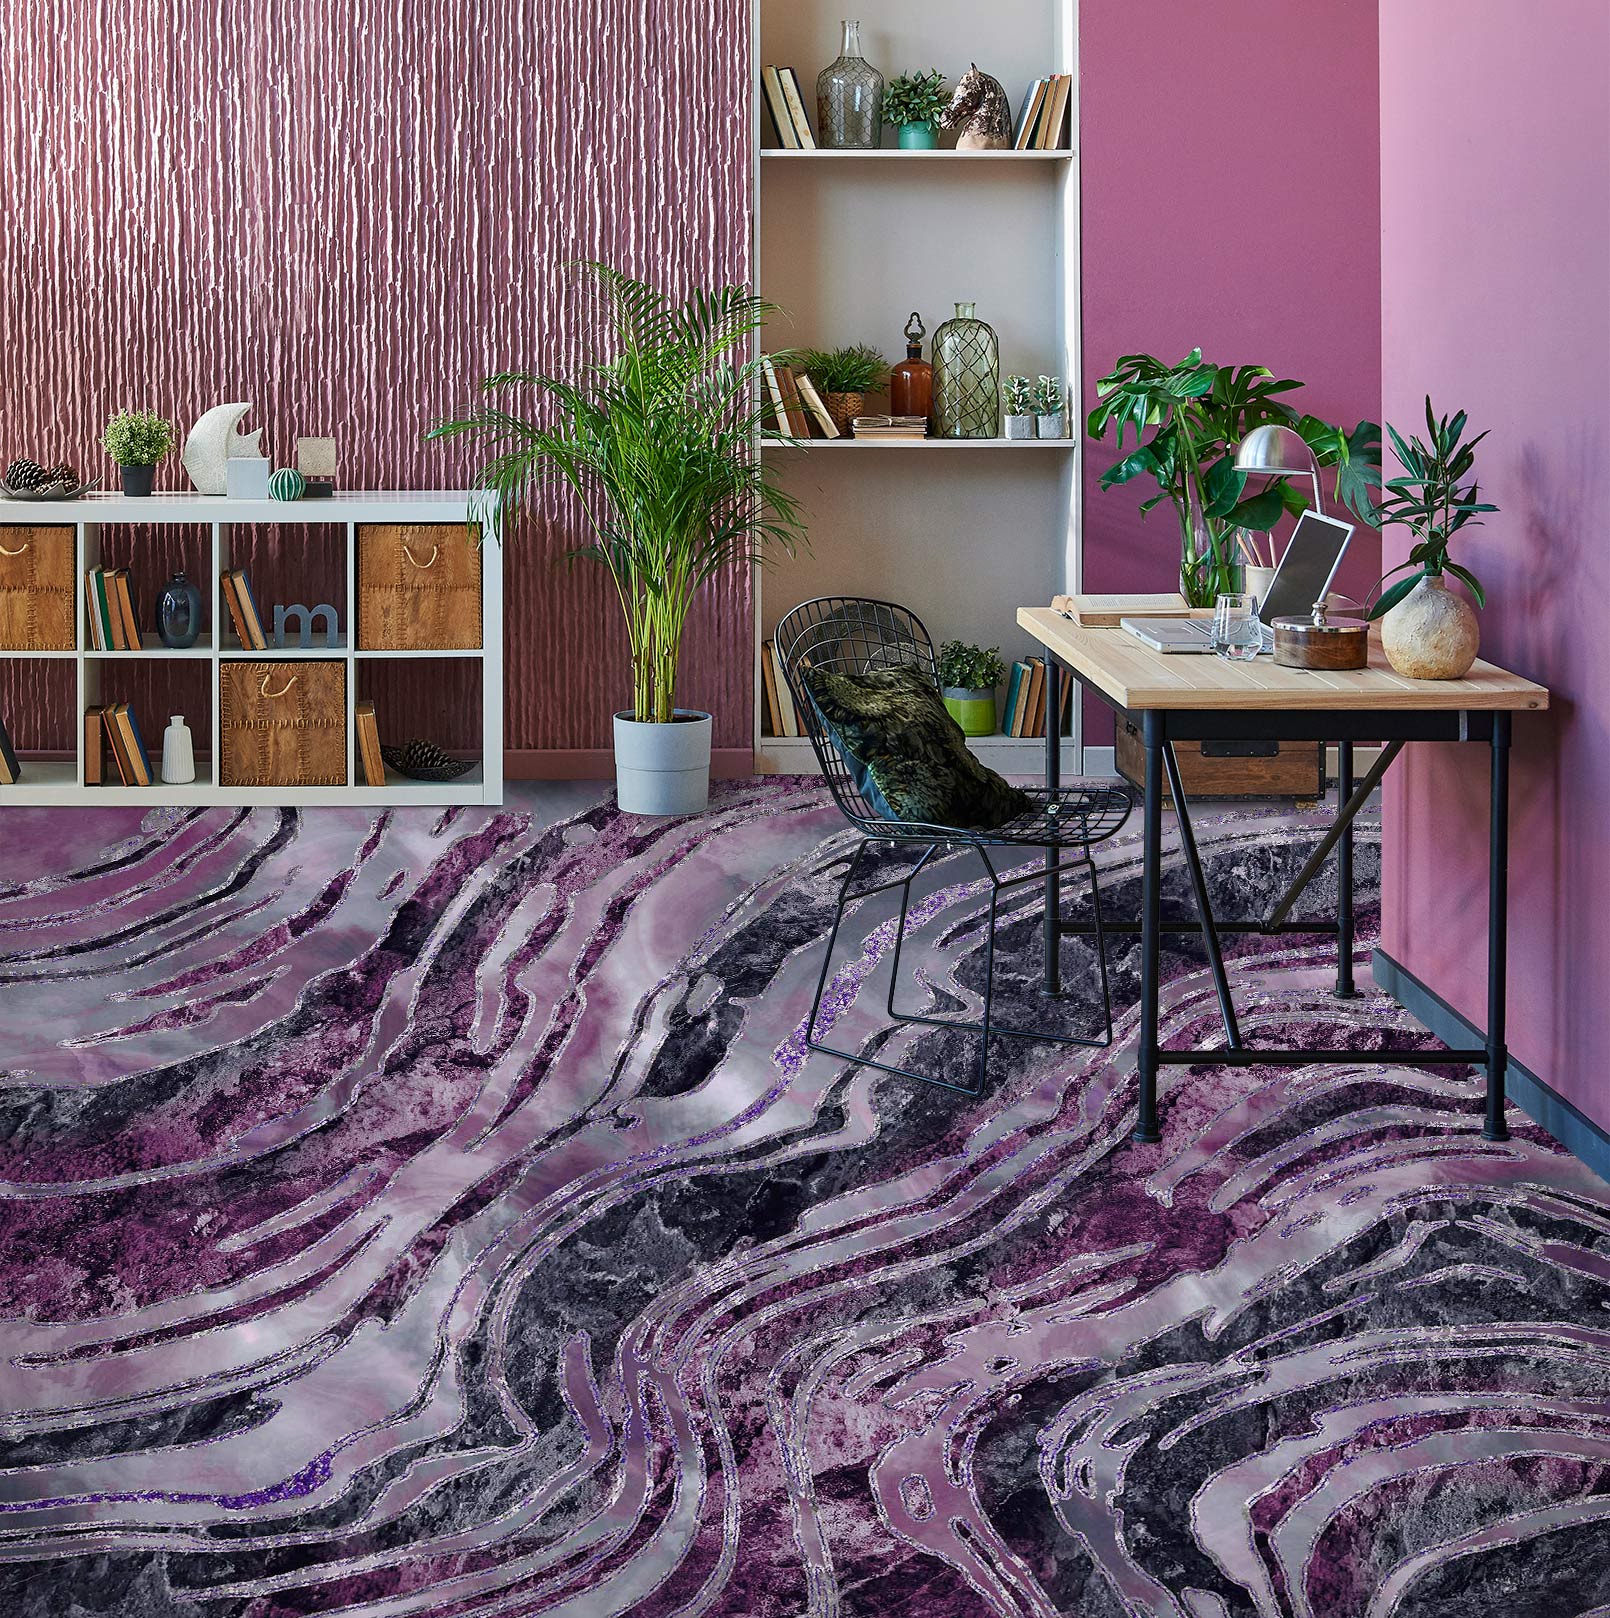 3D Purple Striped Pattern 102136 Andrea Haase Floor Mural  Wallpaper Murals Self-Adhesive Removable Print Epoxy